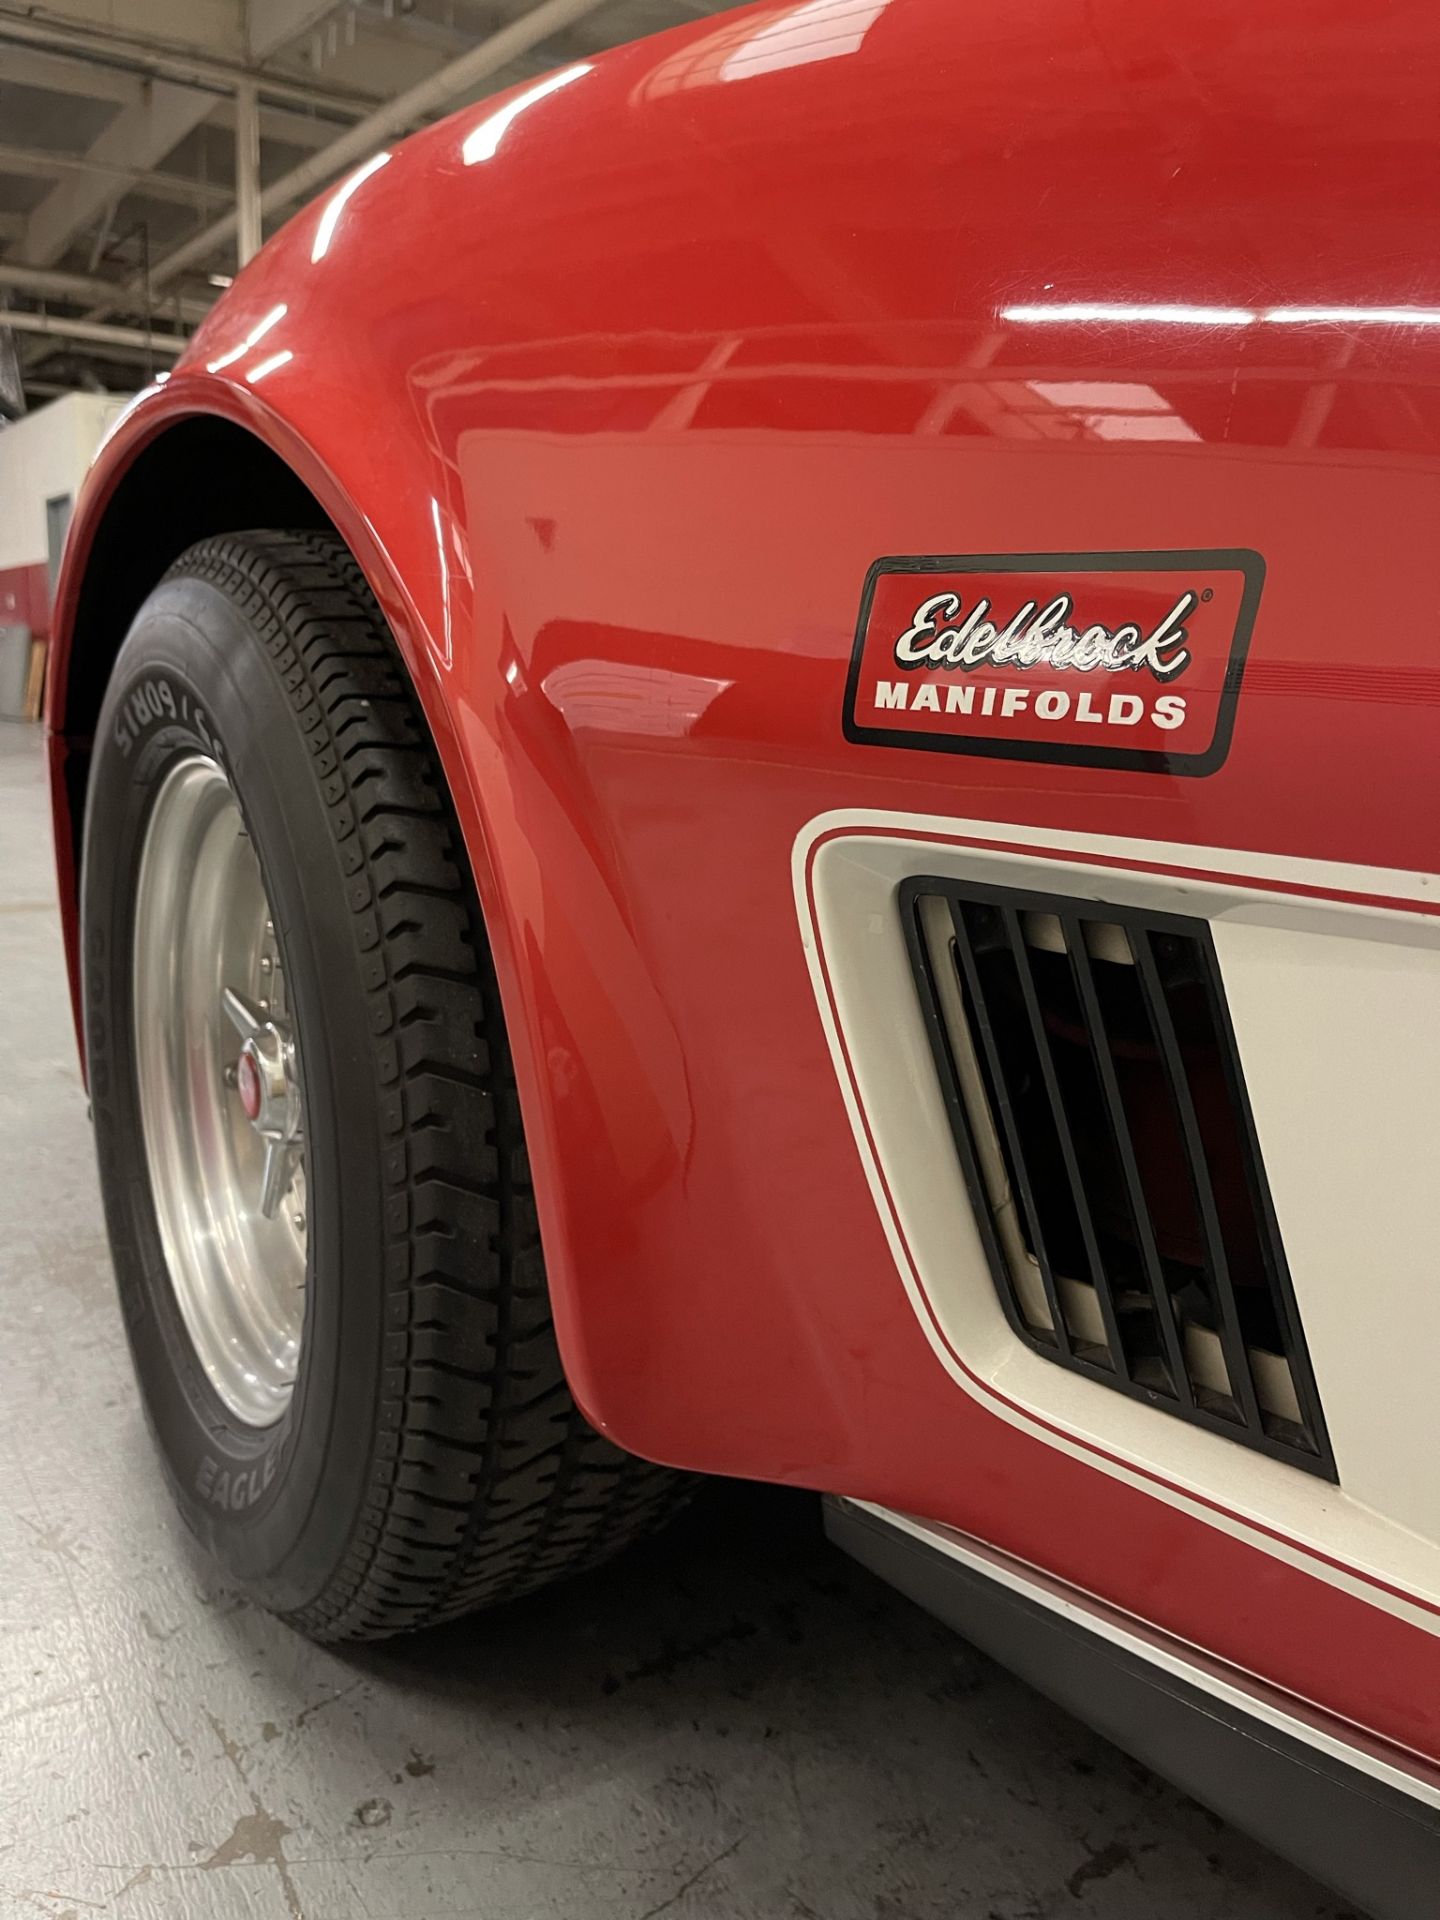 1980 CHEVROLET CORVETTE, WAS VIC EDELBROCK'S PERSONAL CAR BOUGHT FOR R&D, RED INTERIOR, TITLE ONLY. - Image 26 of 70